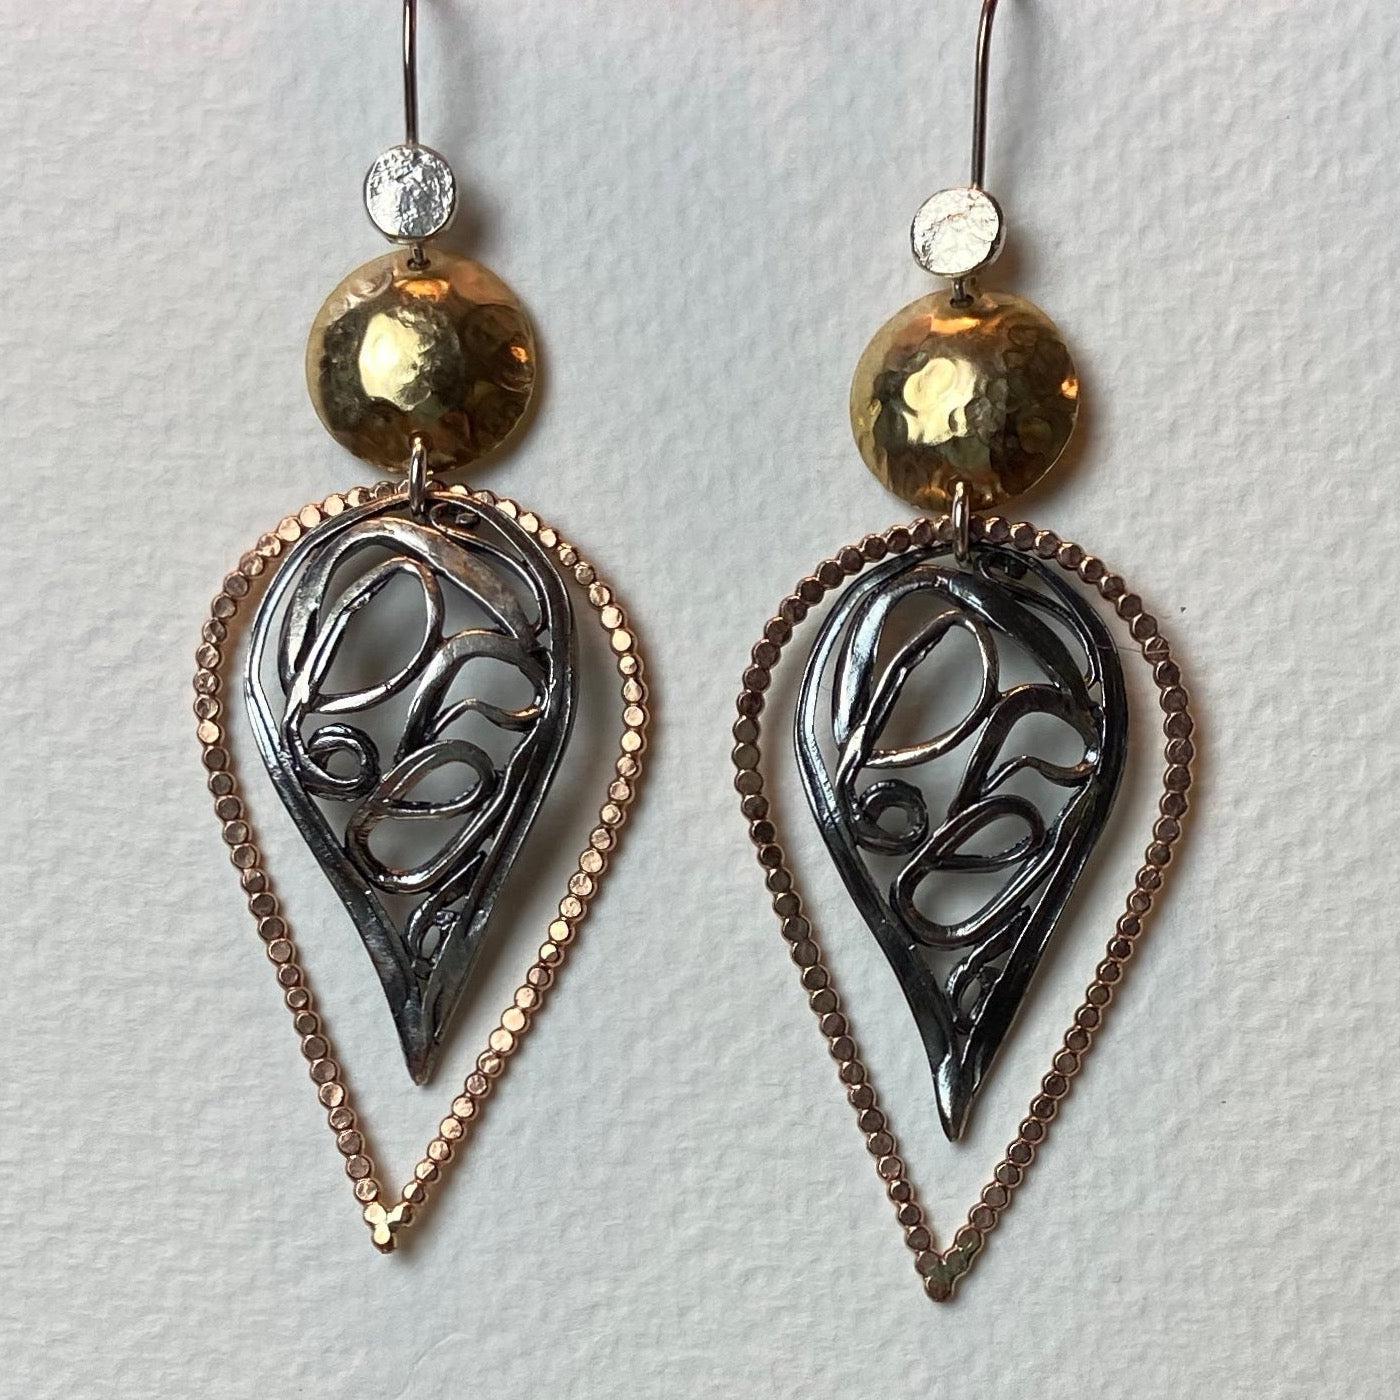 Copper Gold and Silver Earrings - The Nancy Smillie Shop - Art, Jewellery & Designer Gifts Glasgow